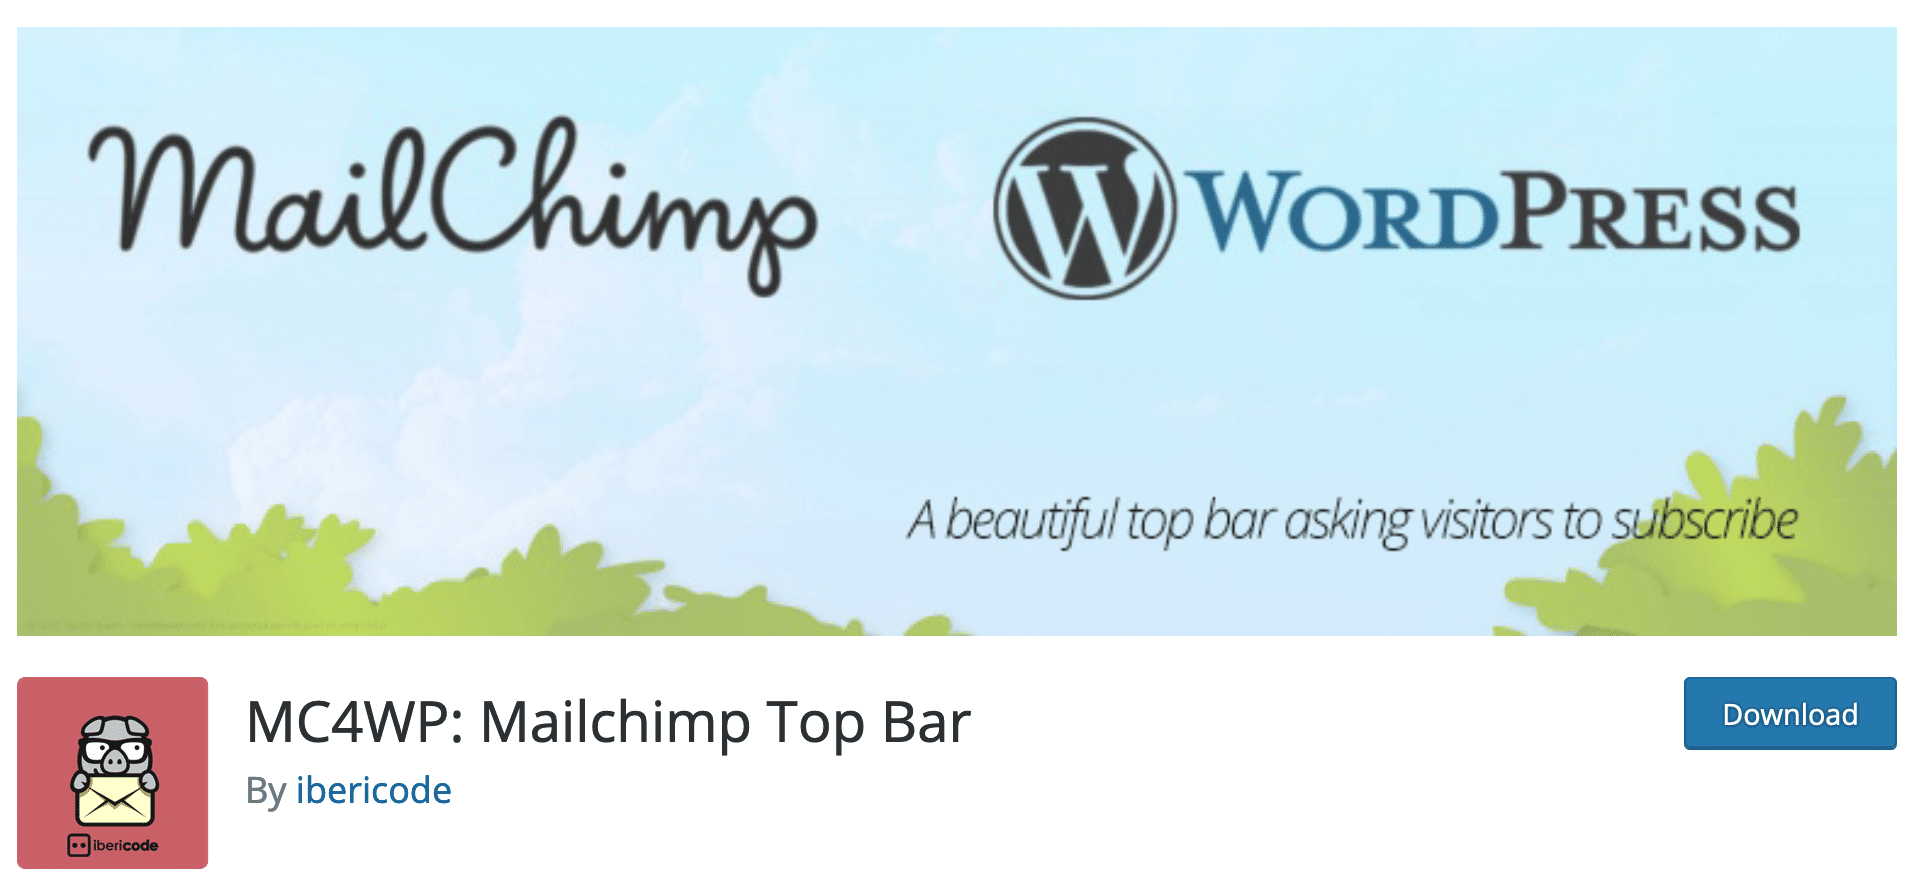 MC4WP: Mailchimp Top Bar plugin to download on the official WordPress repository.